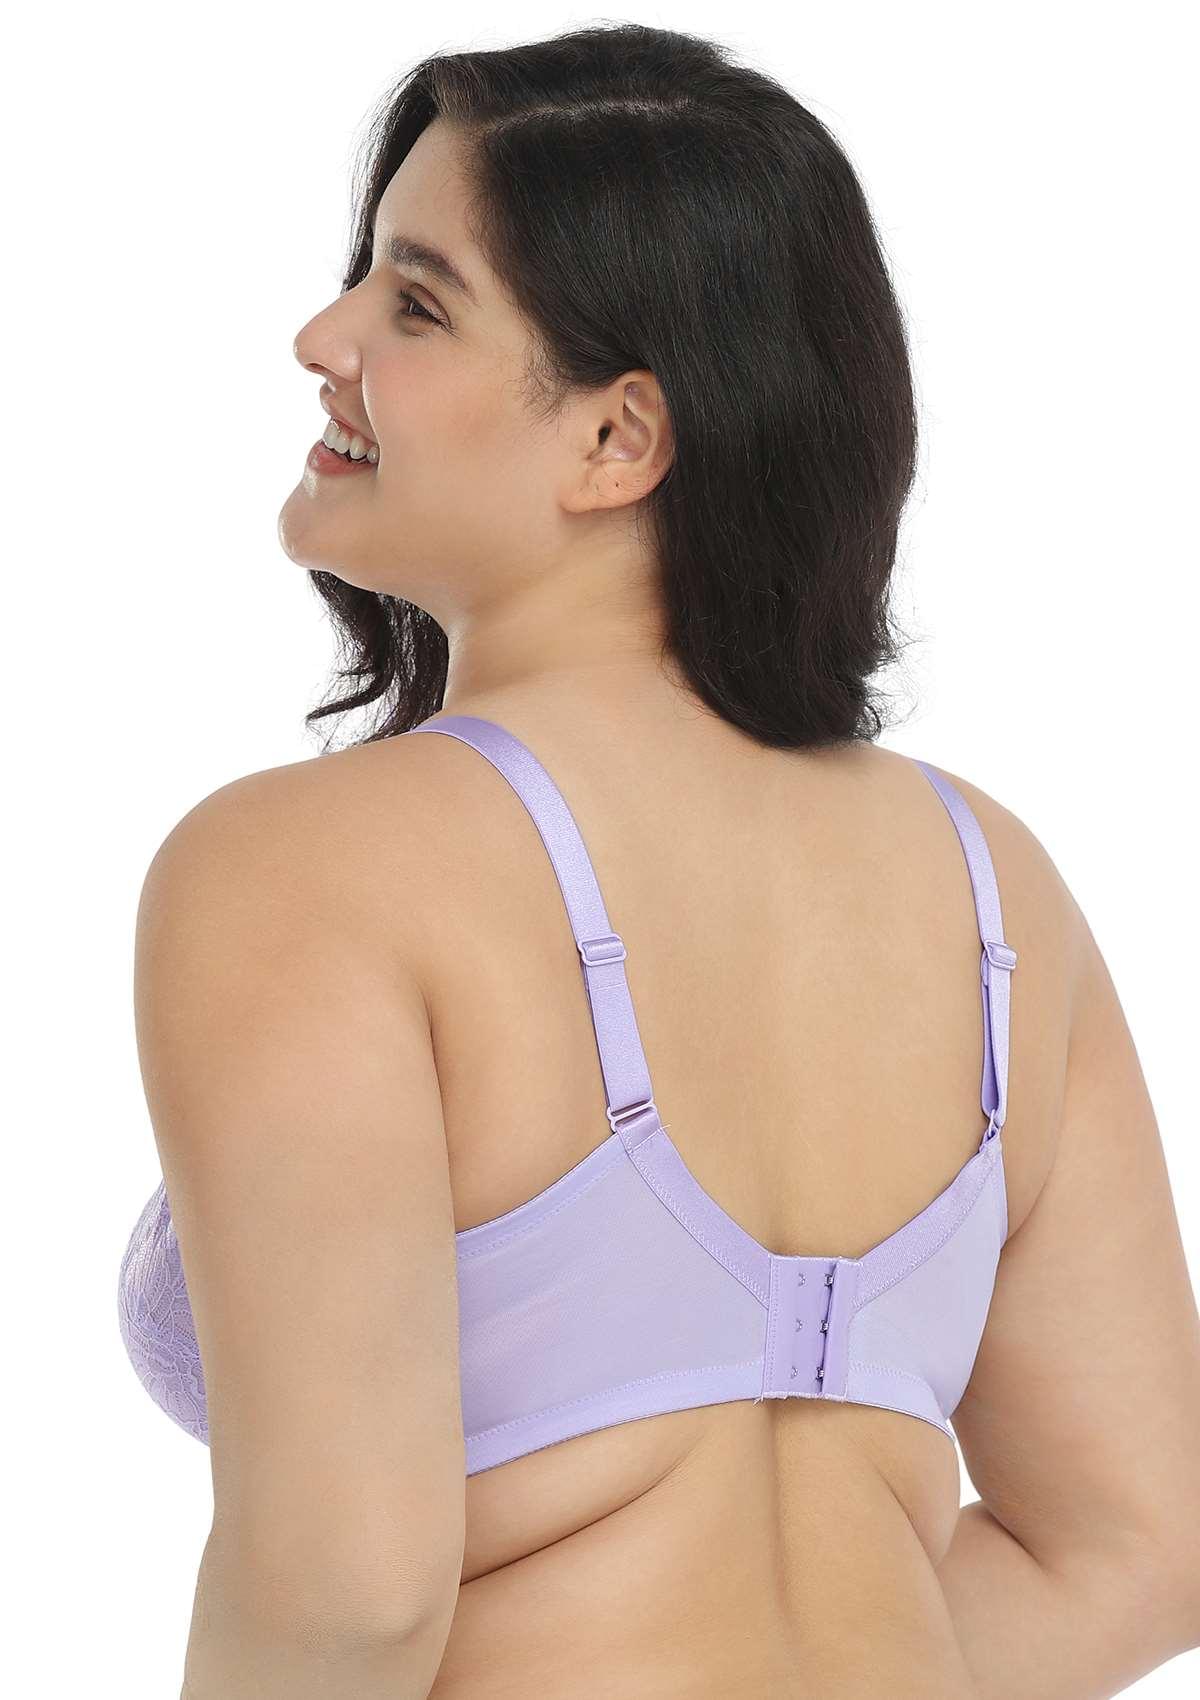 HSIA Blossom Transparent Lace Bra: Plus Size Wired Back Smoothing Bra - Purple / 38 / C